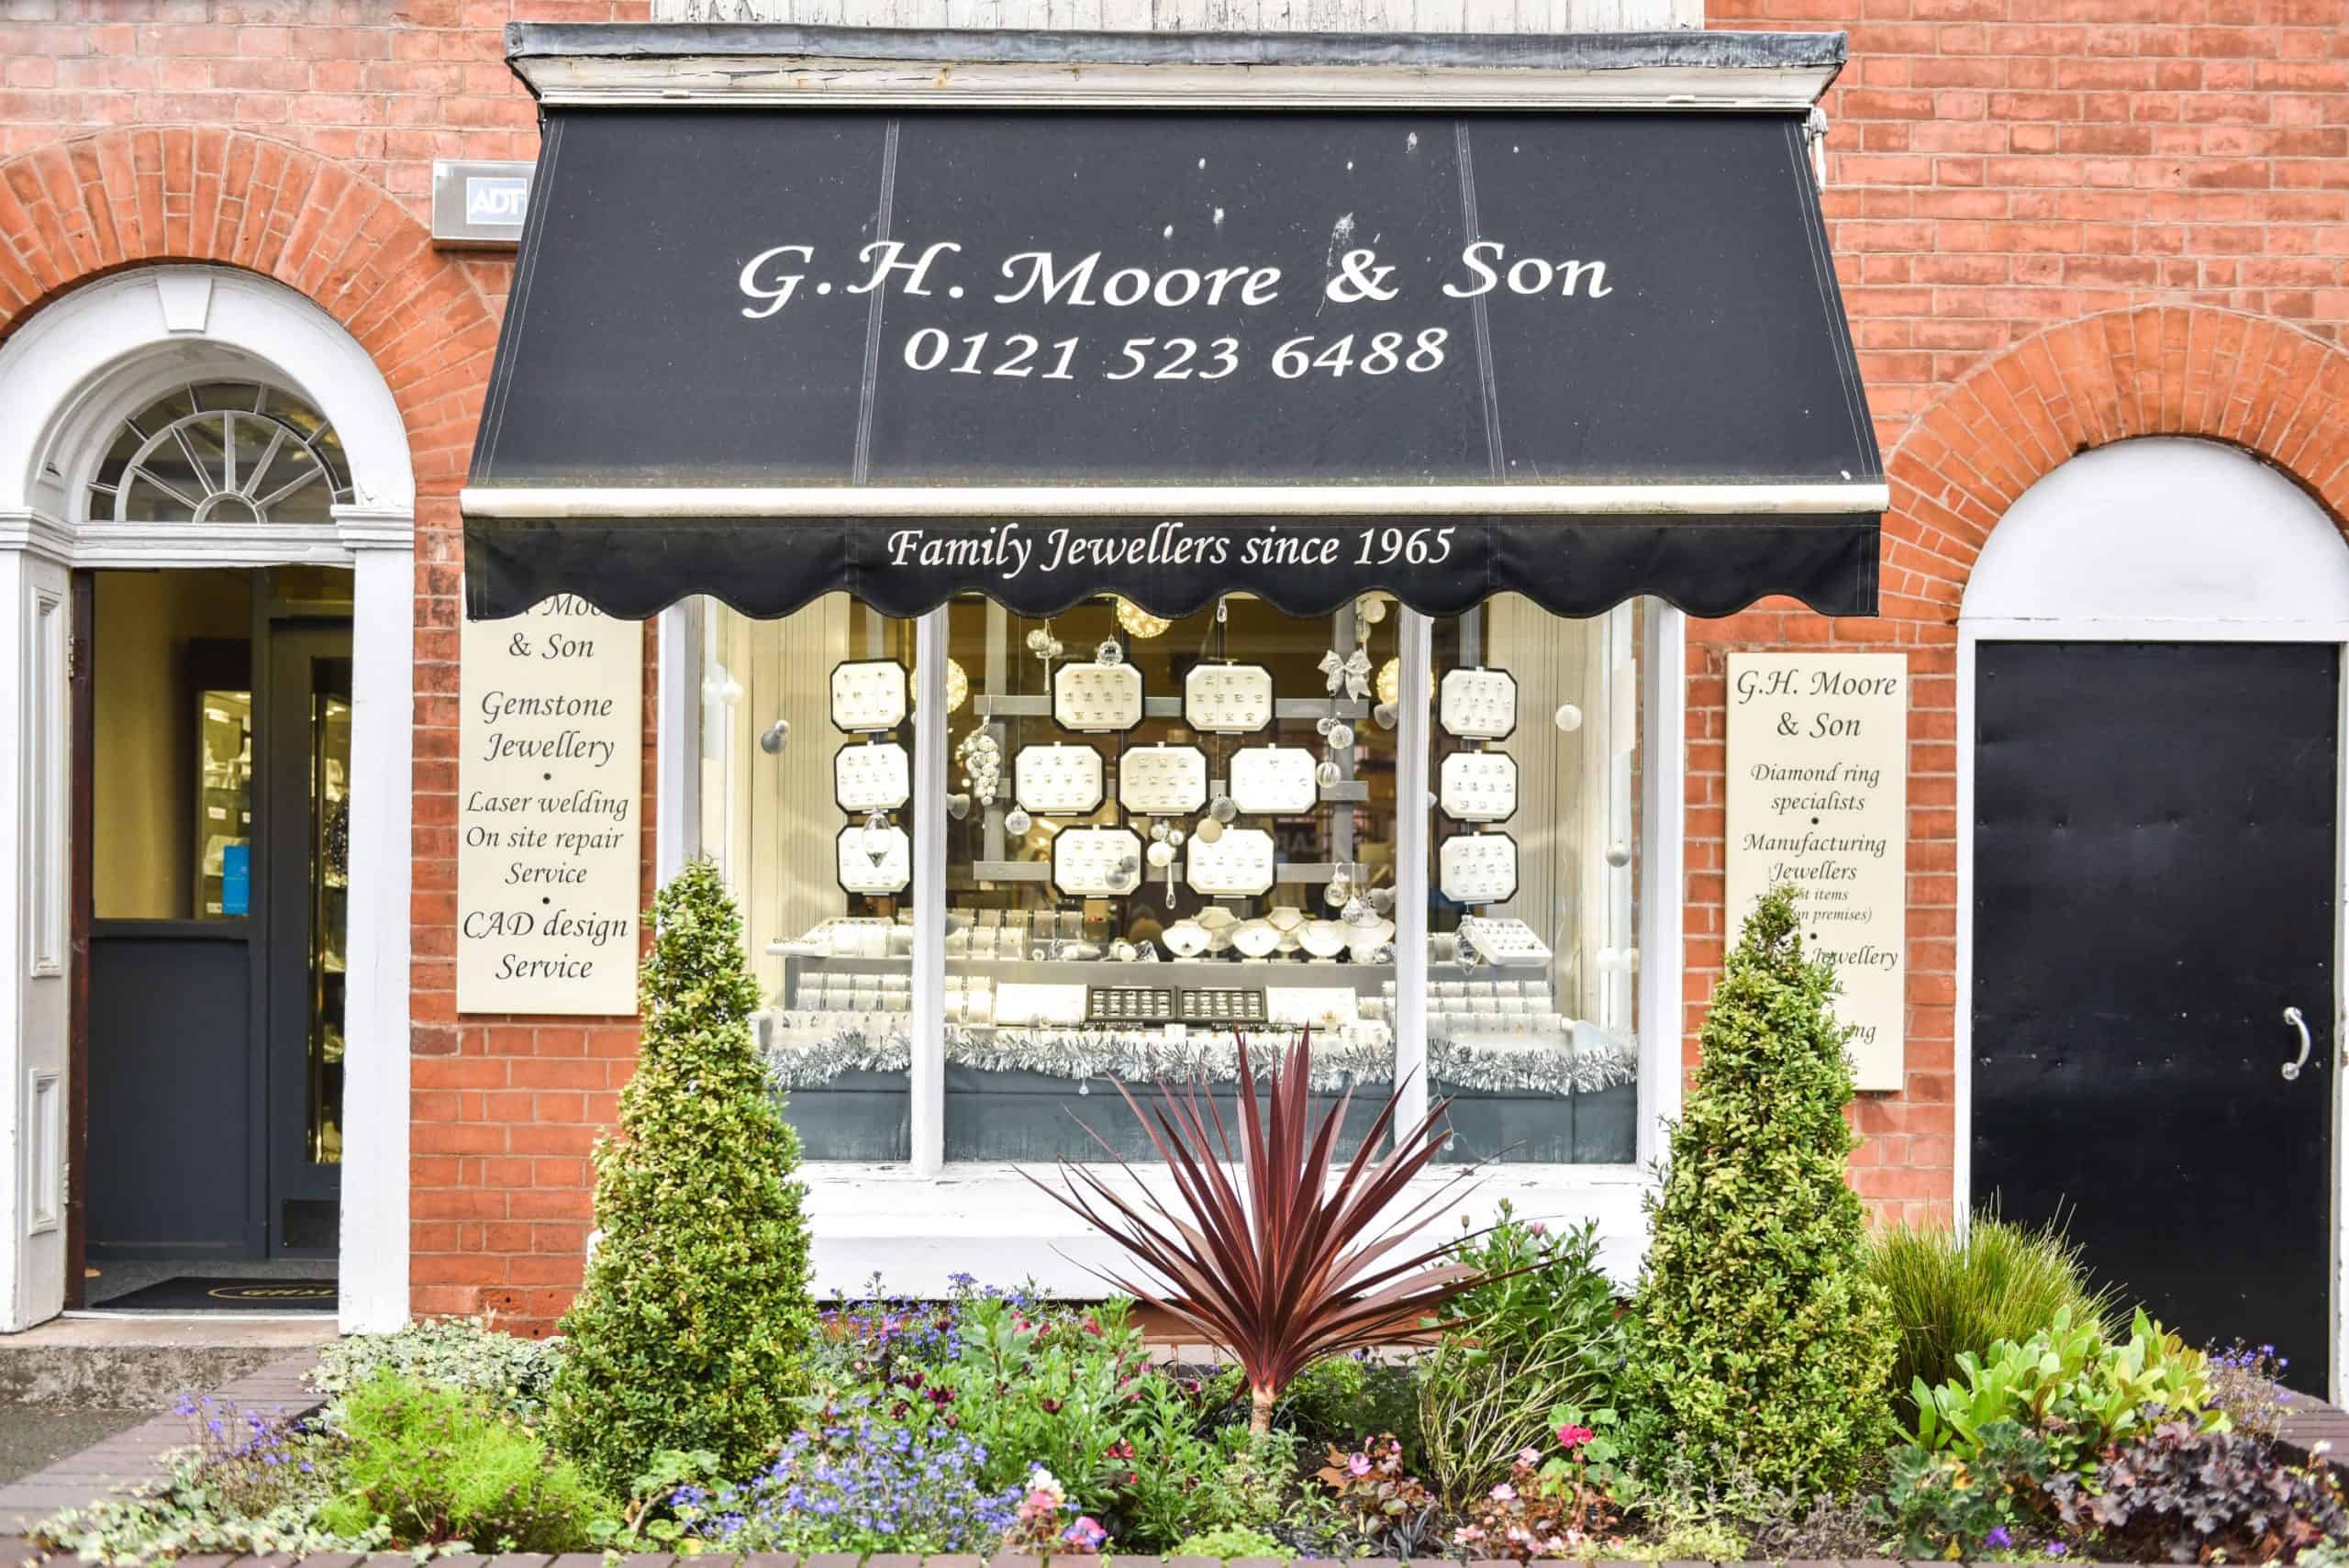 78. G.H. Moore and Son